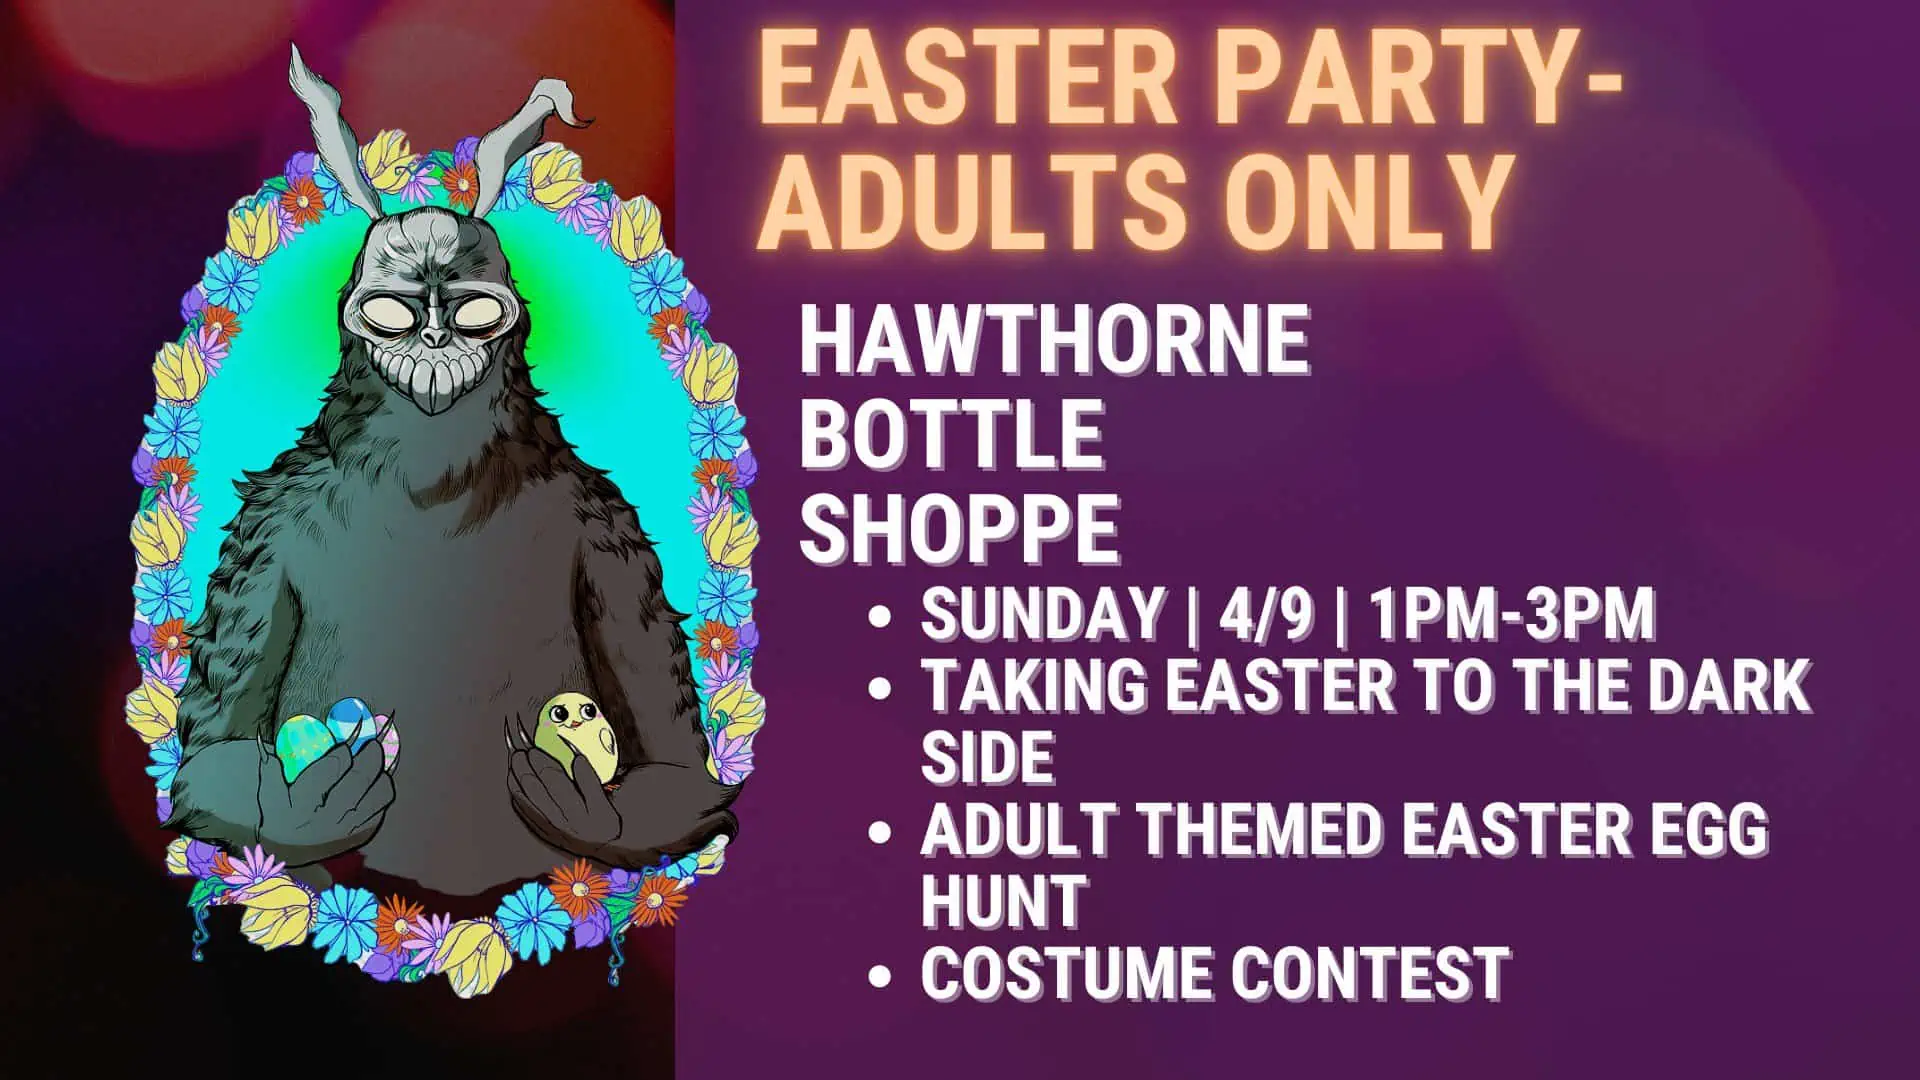 Adults-only Easter party at Hawthorne Bottle Shoppe